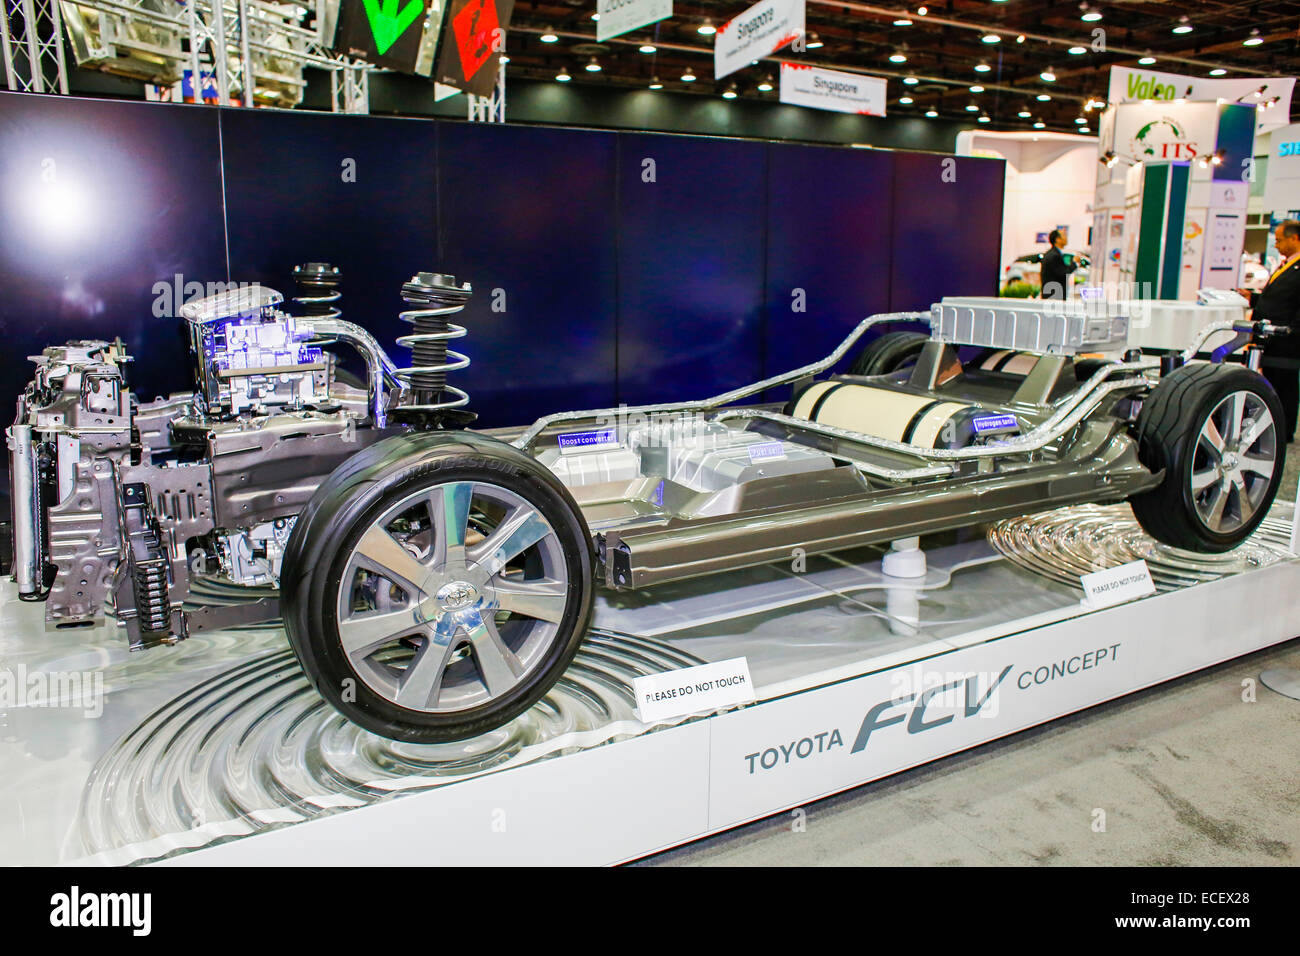 Detroit, Michigan -  The chassis of the Toyota FCV hydrogen fuel cell concept vehicle, on display at the Intelligent Transport S Stock Photo